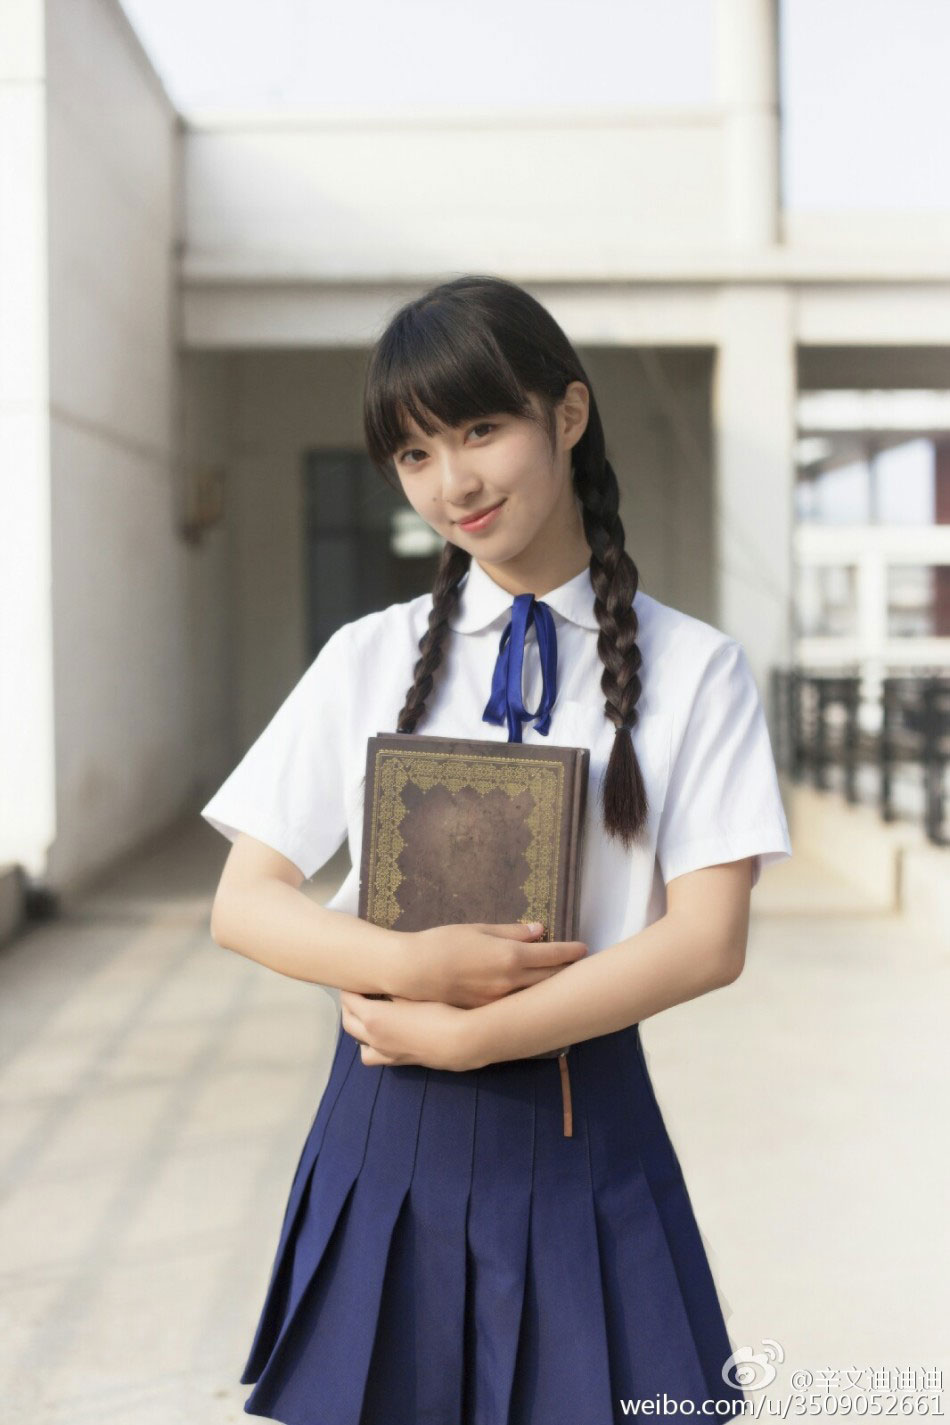 Beautiful university student becomes an instant hit